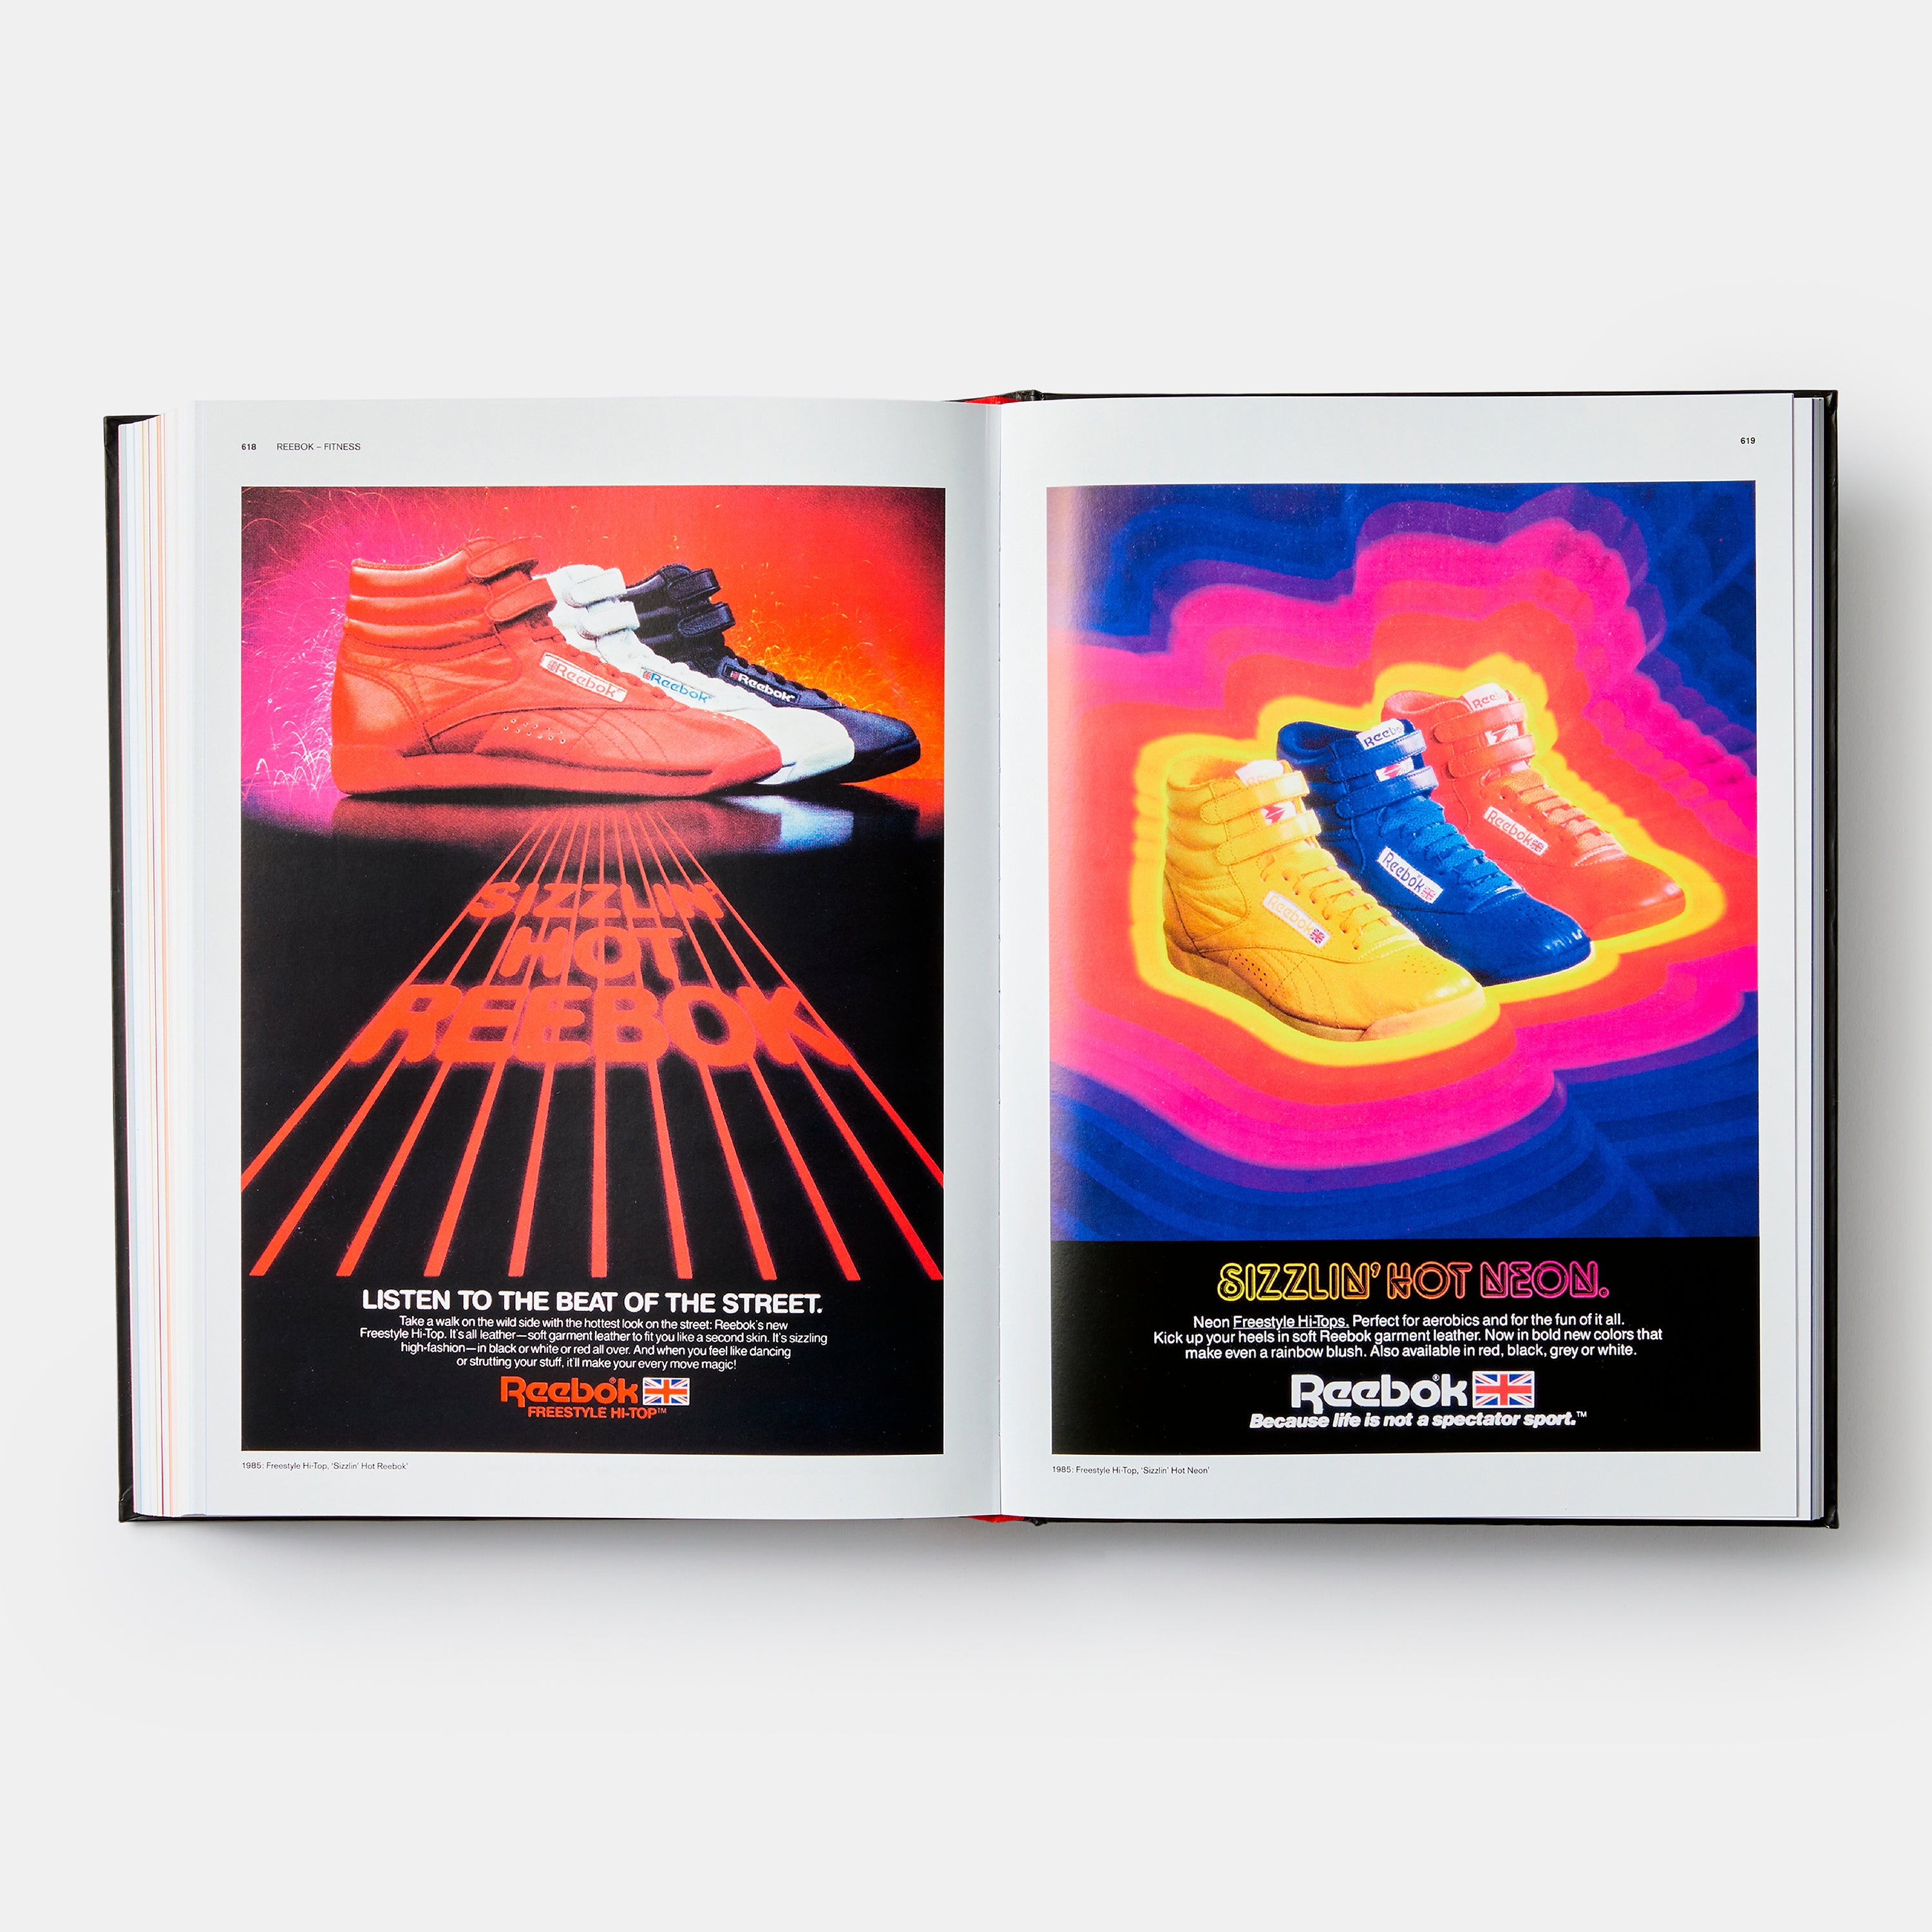 Sneaker Freaker "Soled Out" - The Golden Age Of Sneaker Advertising